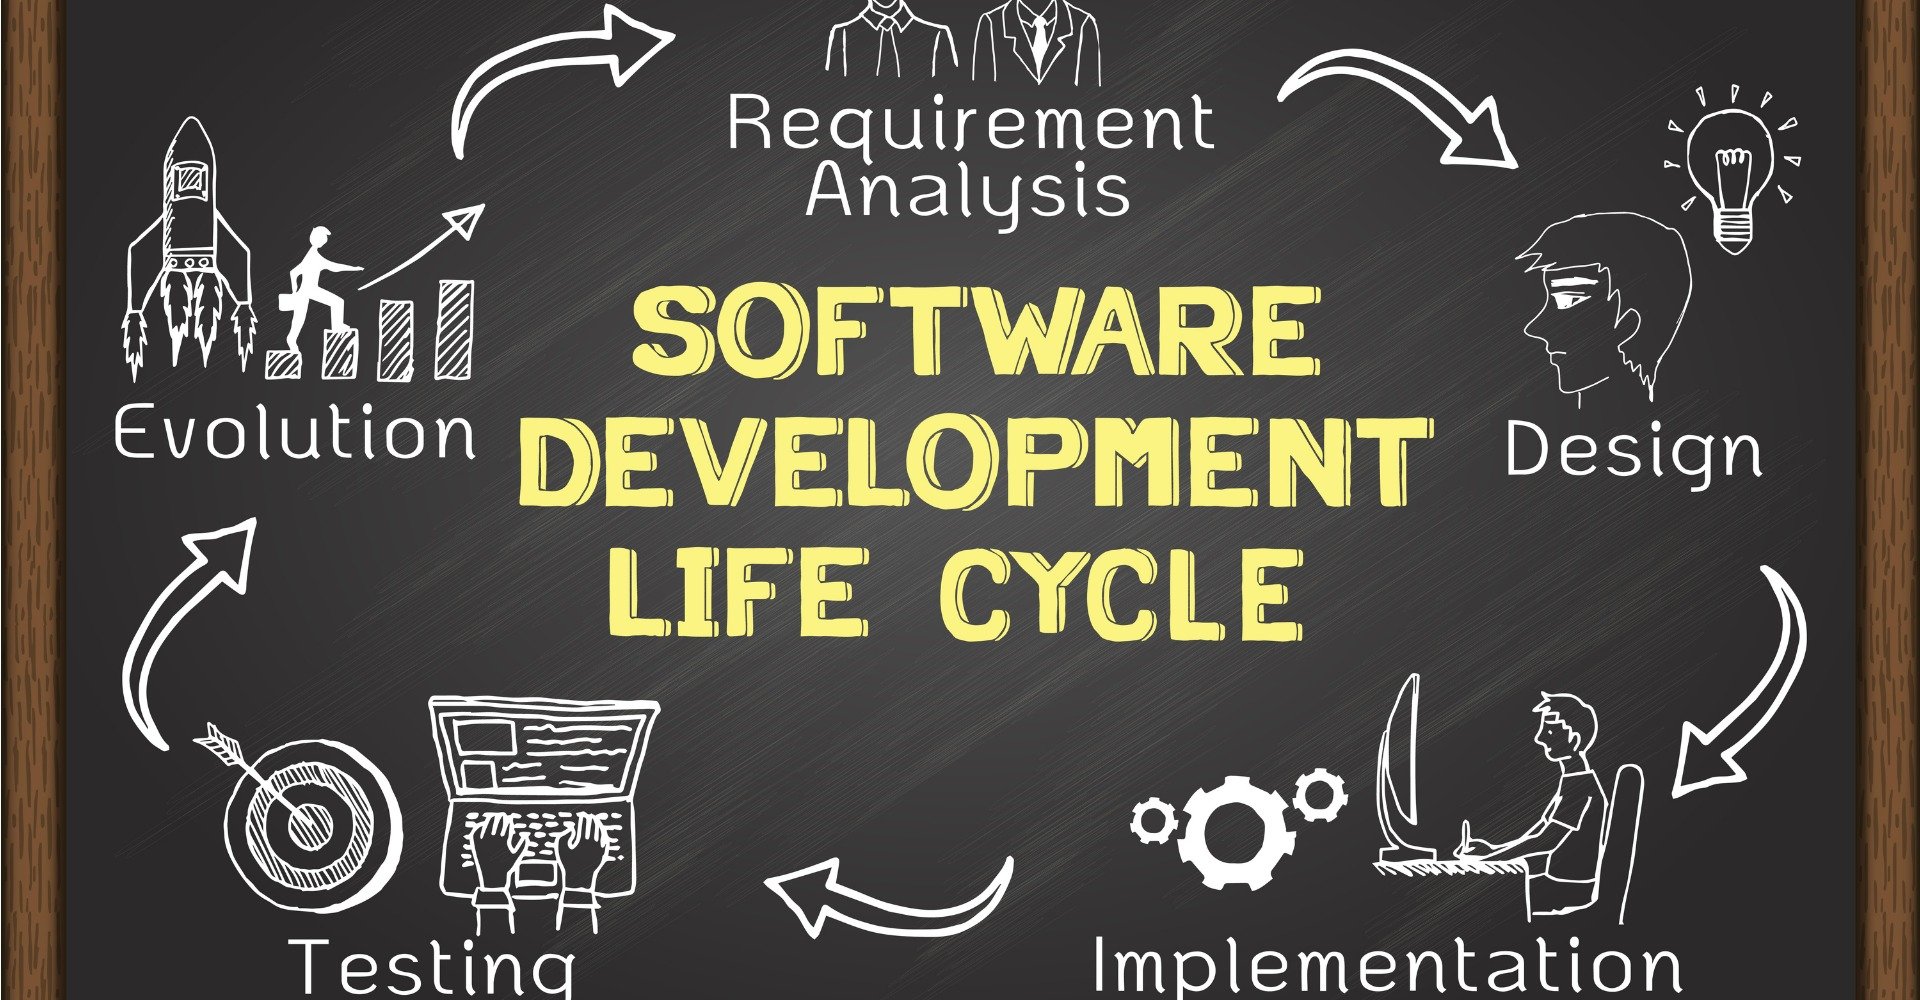 Benefits of the Software Development Life Cycle - 2020